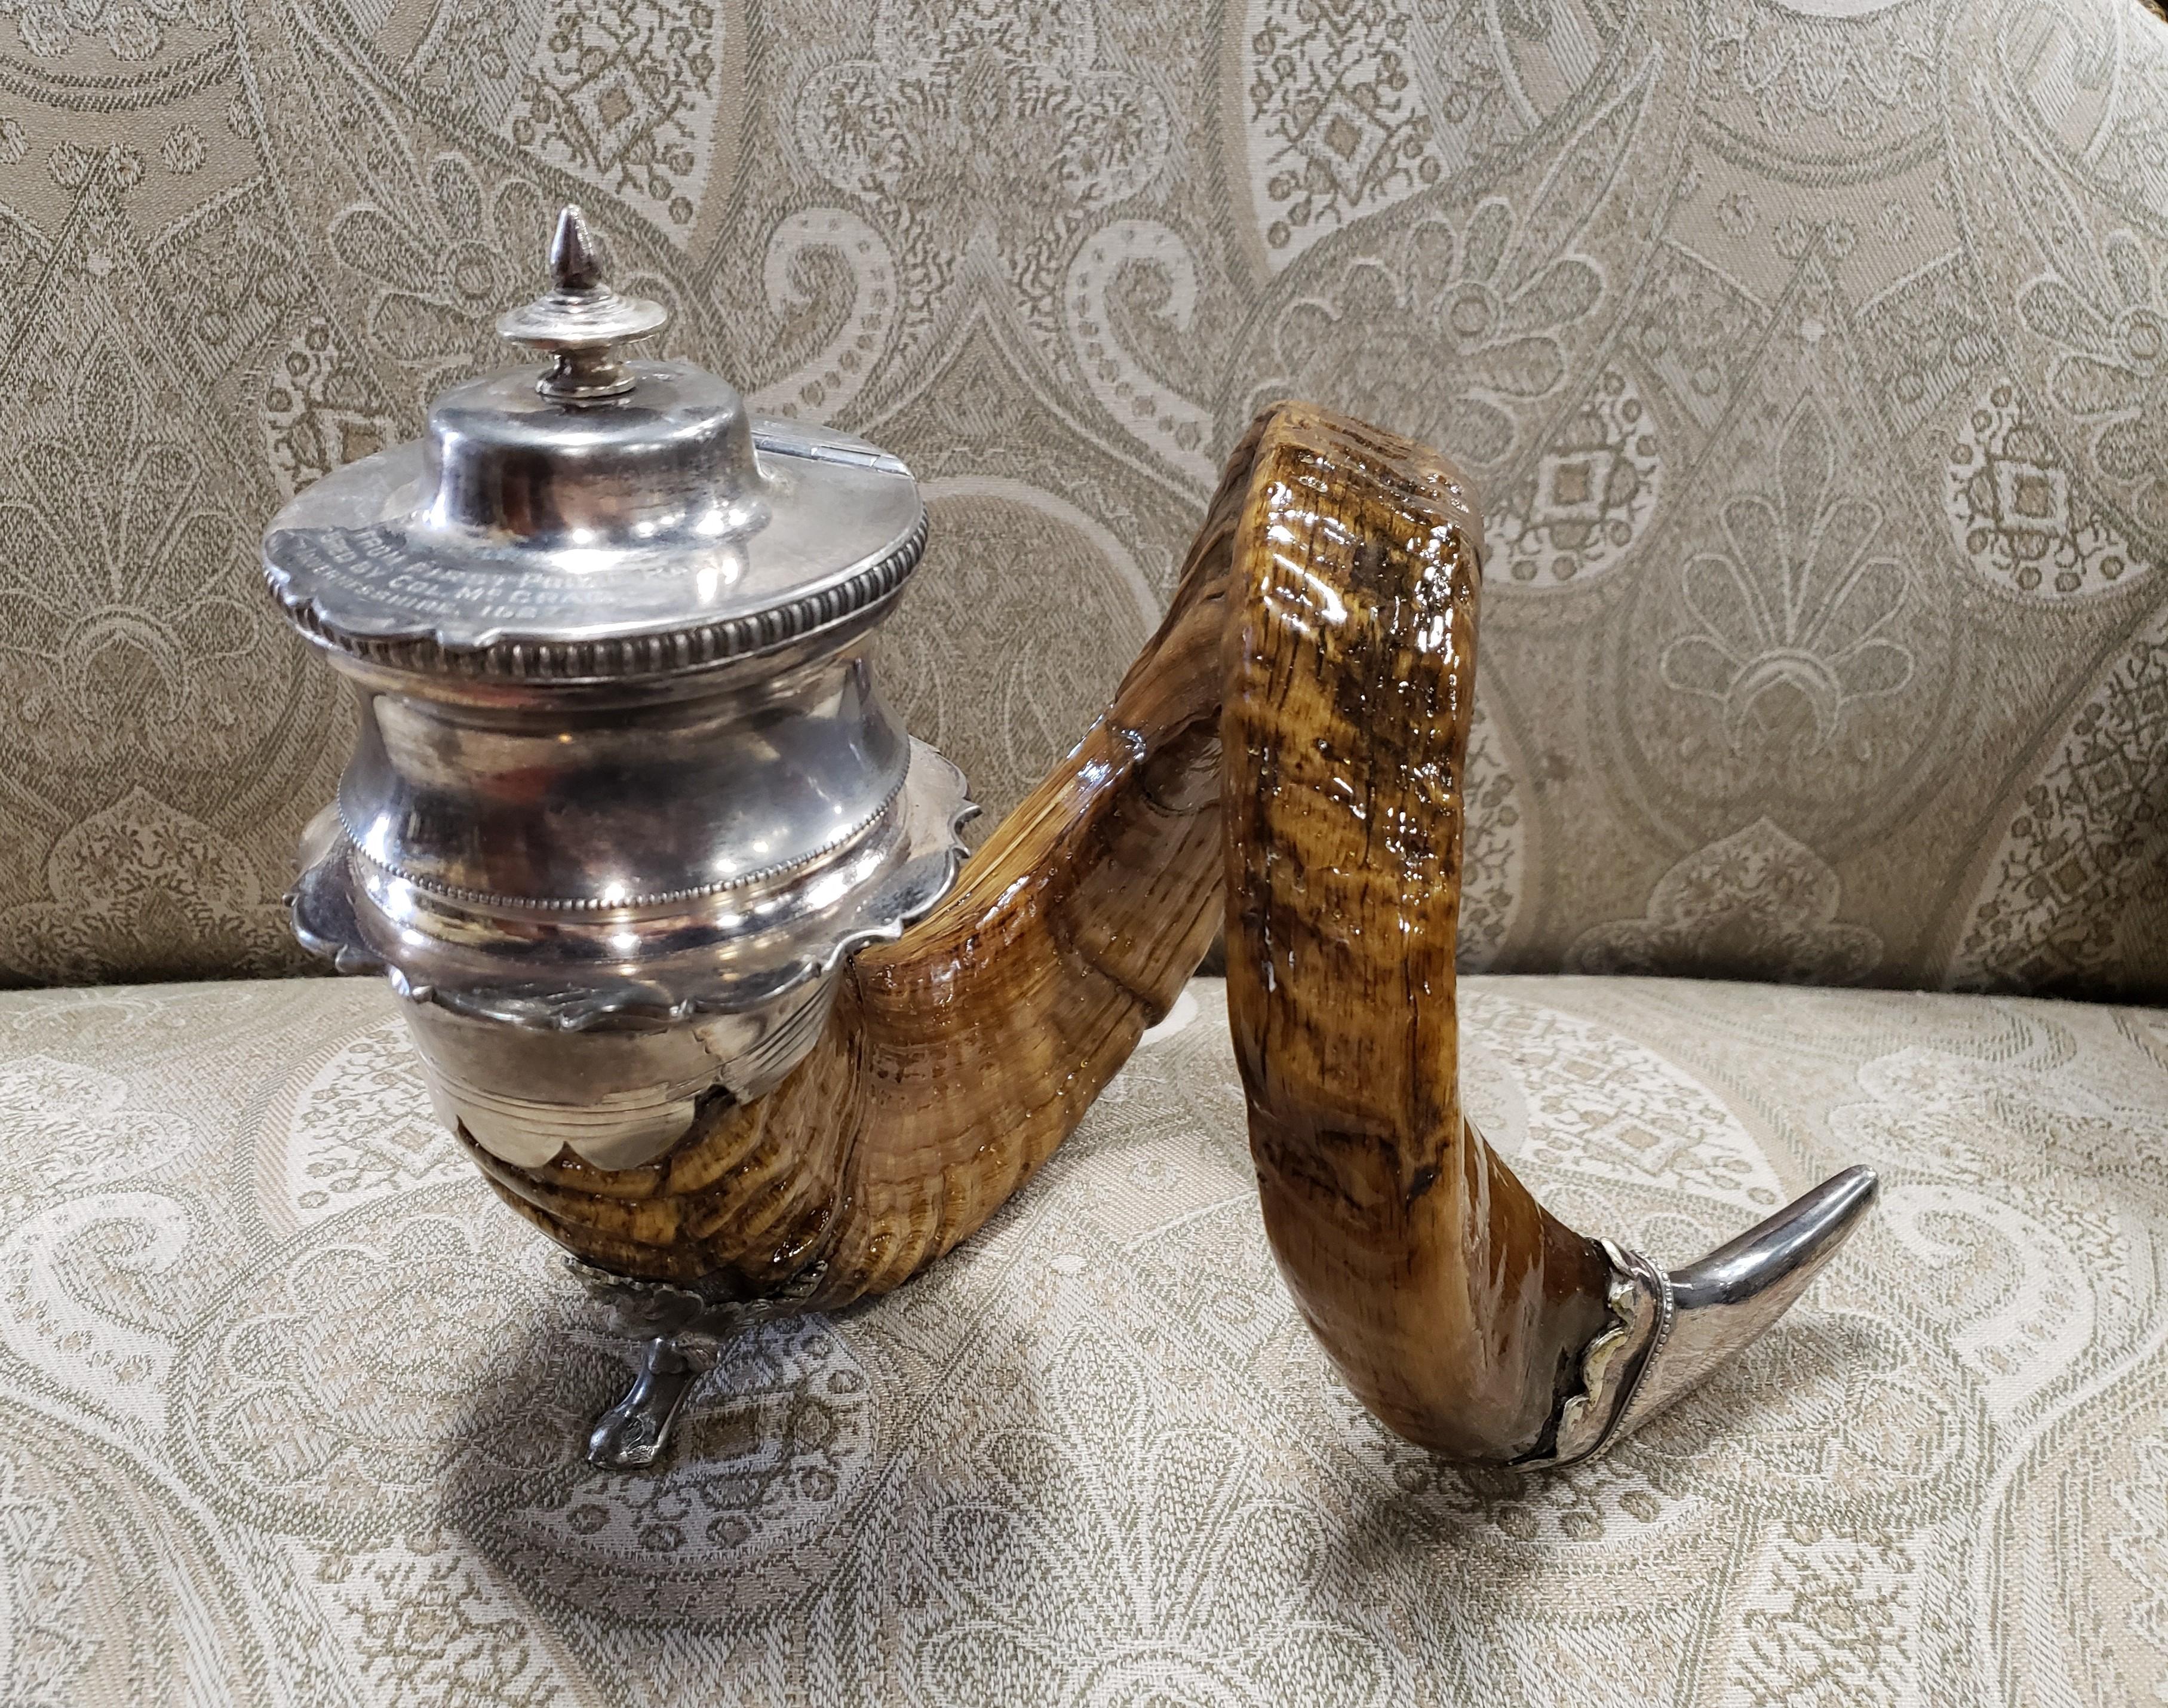 17th century ram horn snuff box and ram horn inkwell. Genuine ram horn with silver plated tip and top. Top is inscribed 